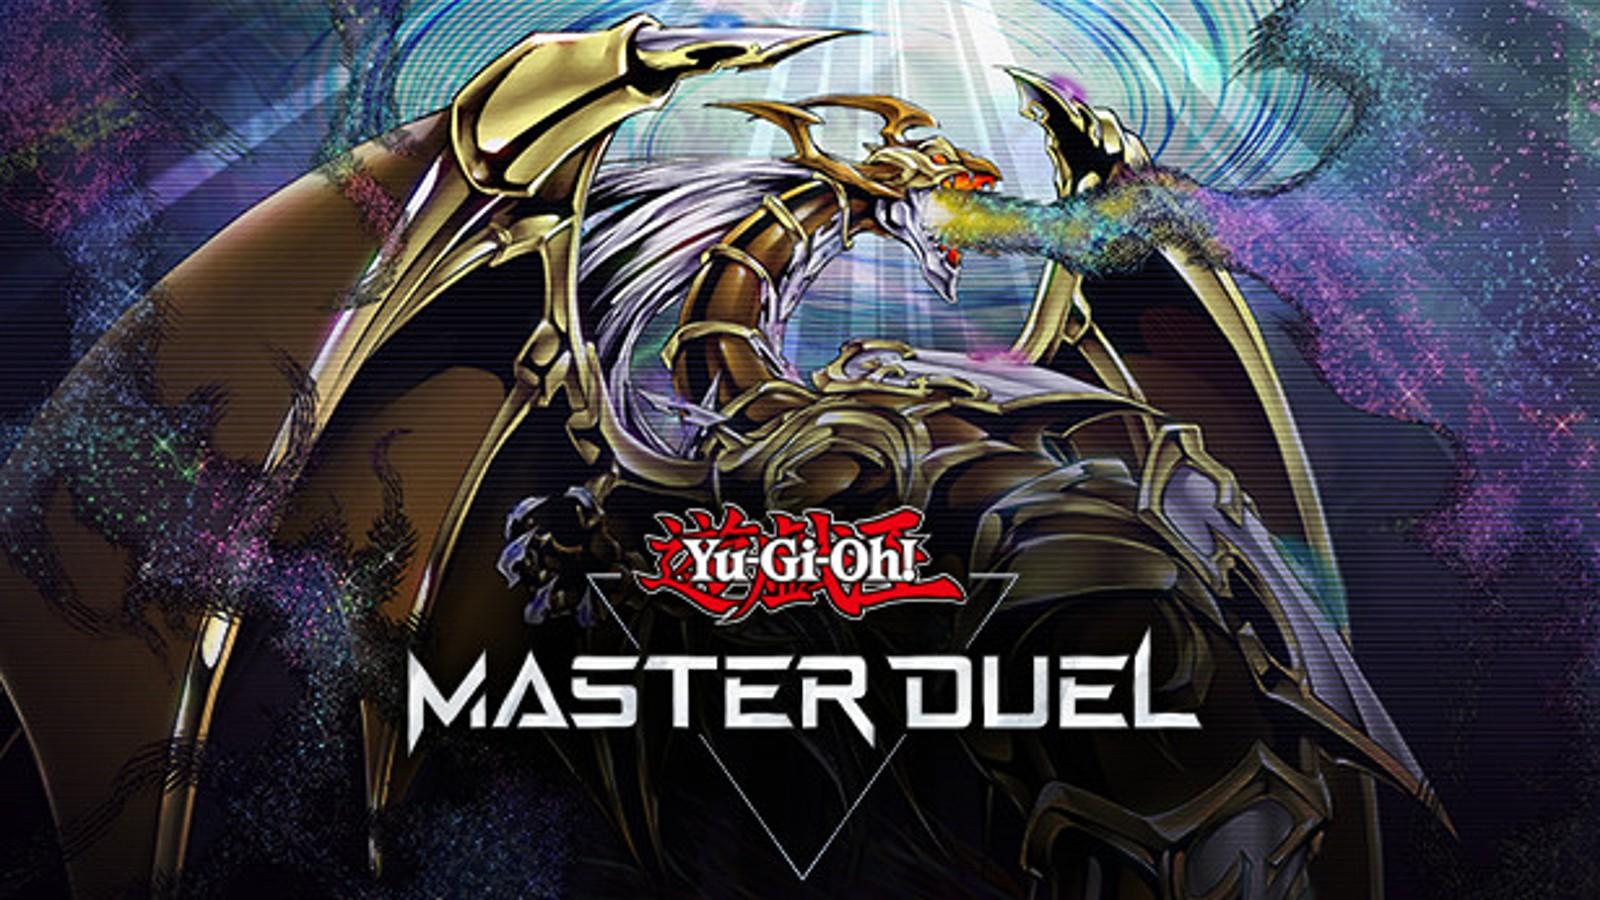 An image of official Yu-Gi-Oh Master Duel artwork.